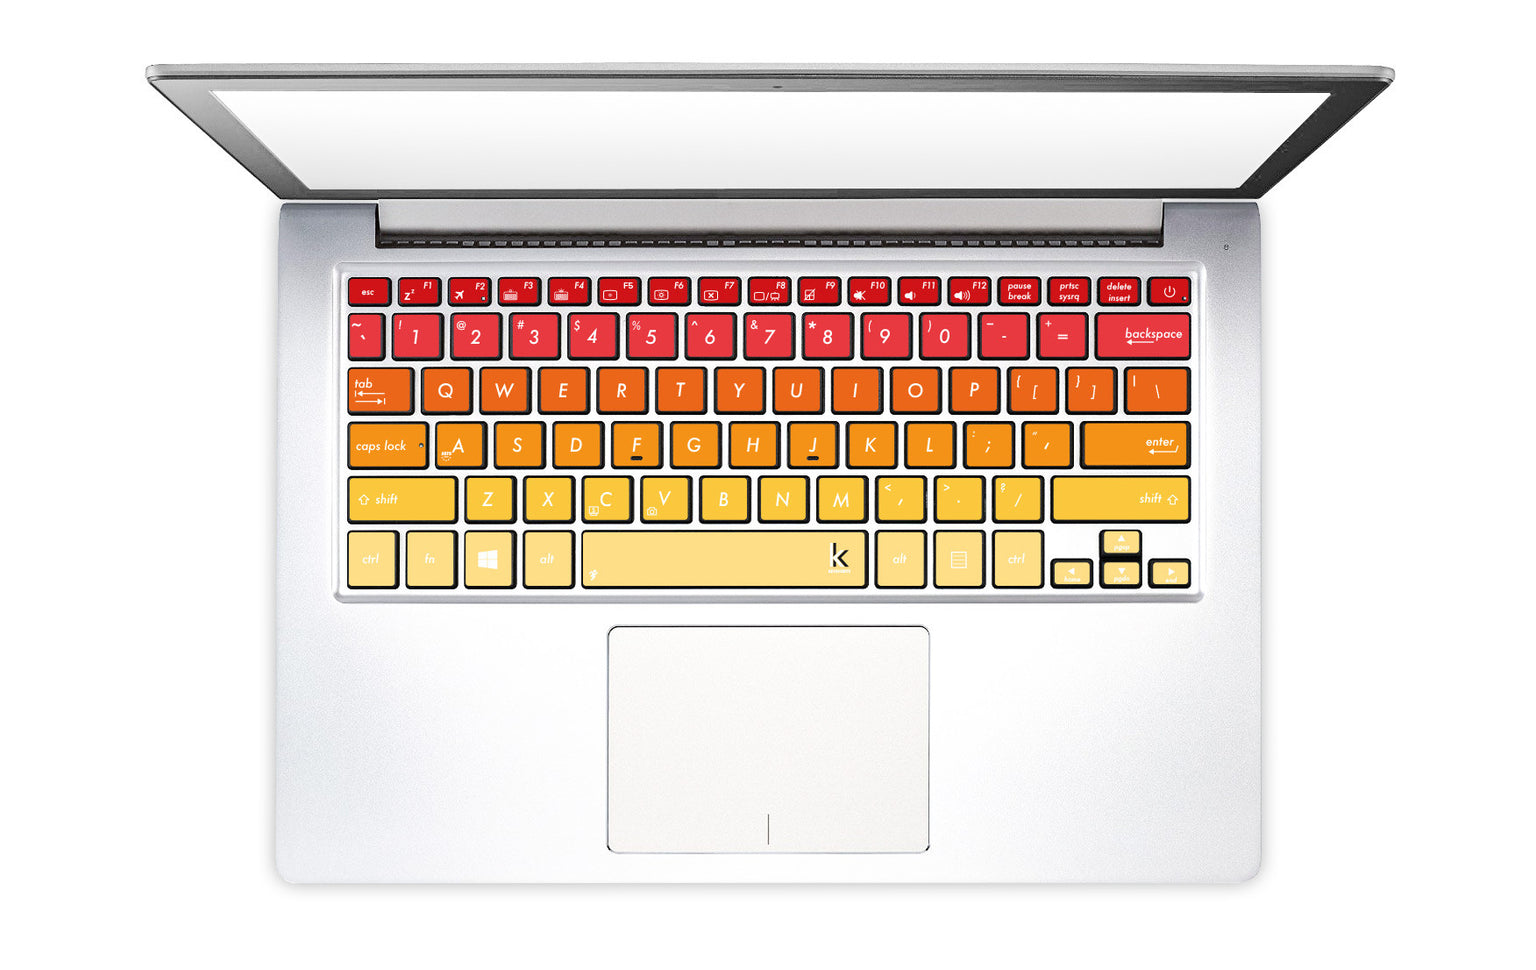 Hot Sauce Laptop Keyboard Stickers decals key overlays